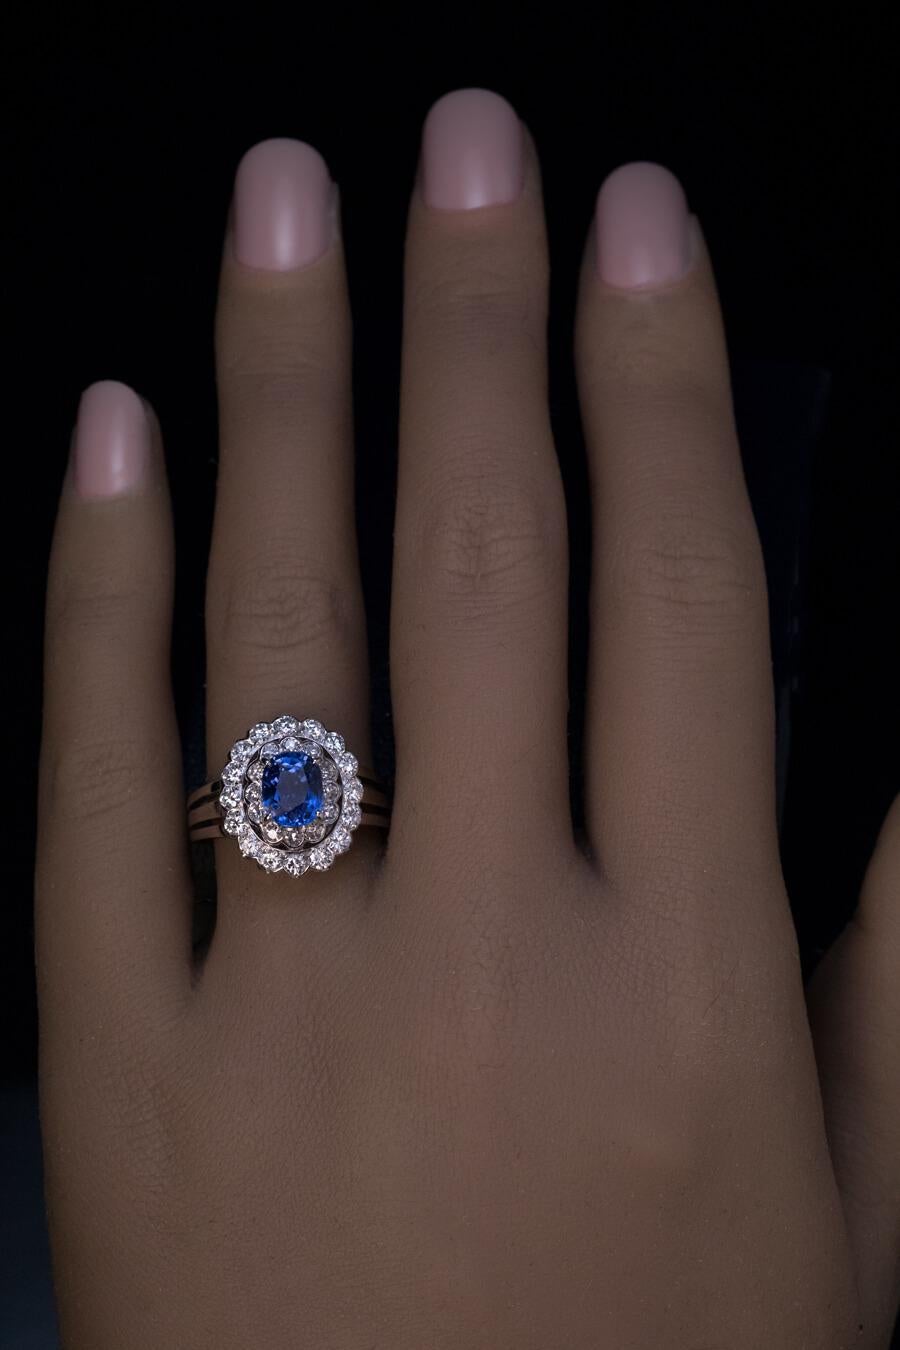 Circa 1950s  The double halo ring is crafted in 14K white gold. It’s centered with a vivid blue sapphire (approximately 1.41 ct, likely of Ceylon origin) framed by a row of single cut diamonds (G-H color, VS1-SI1 clarity) and a row of brilliant cut